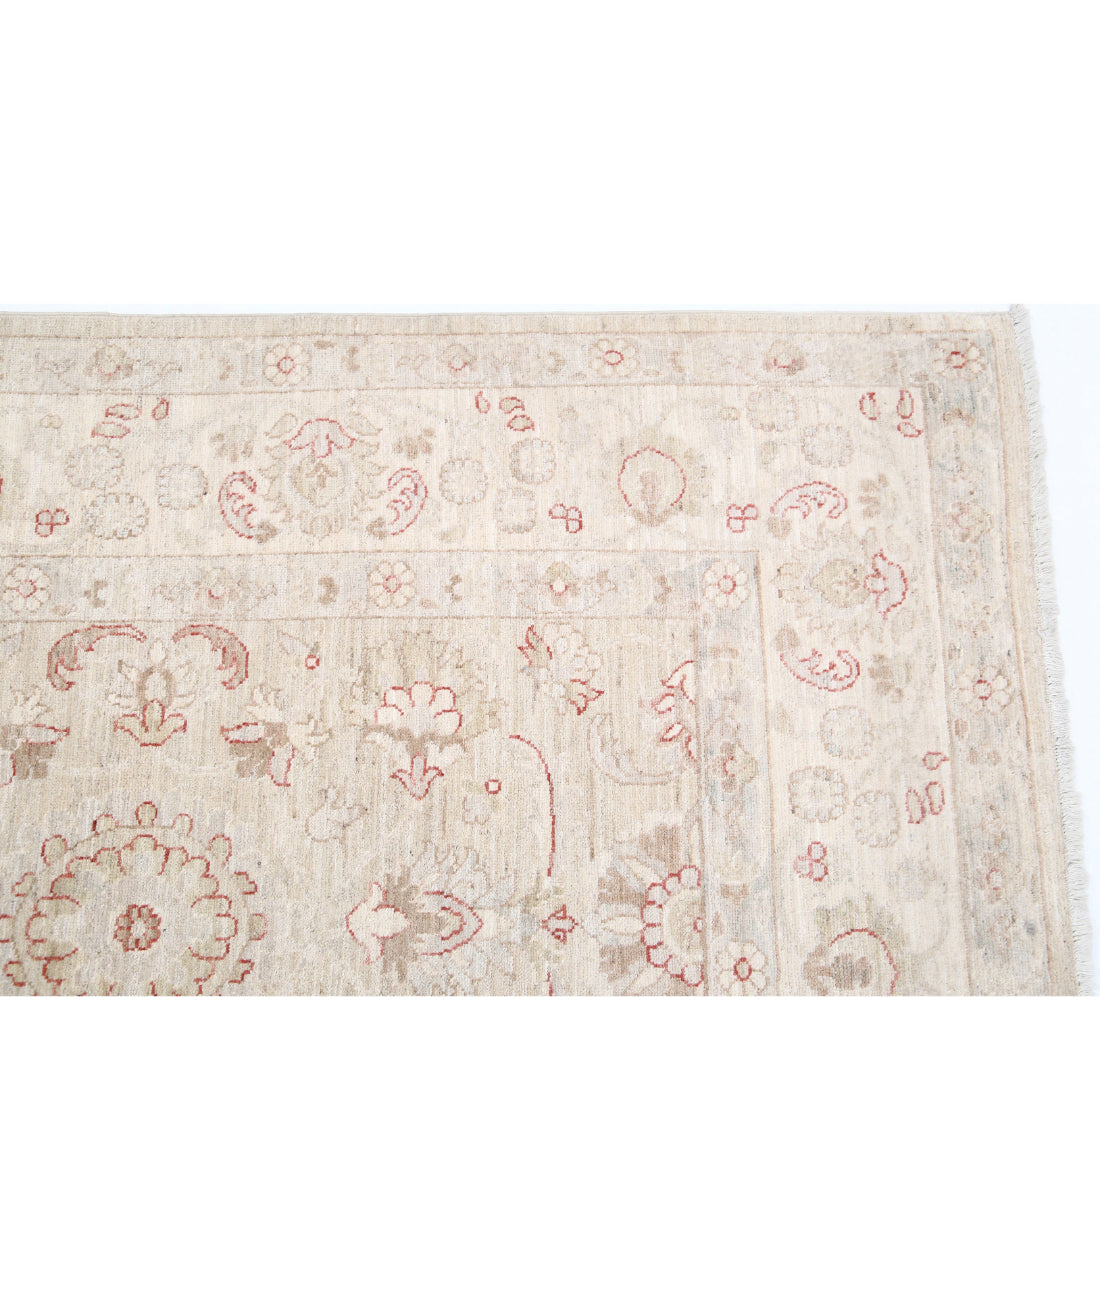 Hand Knotted Bakhtiari Wool Rug - 3'4'' x 4'8'' 3'4'' x 4'8'' (100 X 140) / Red / Blue